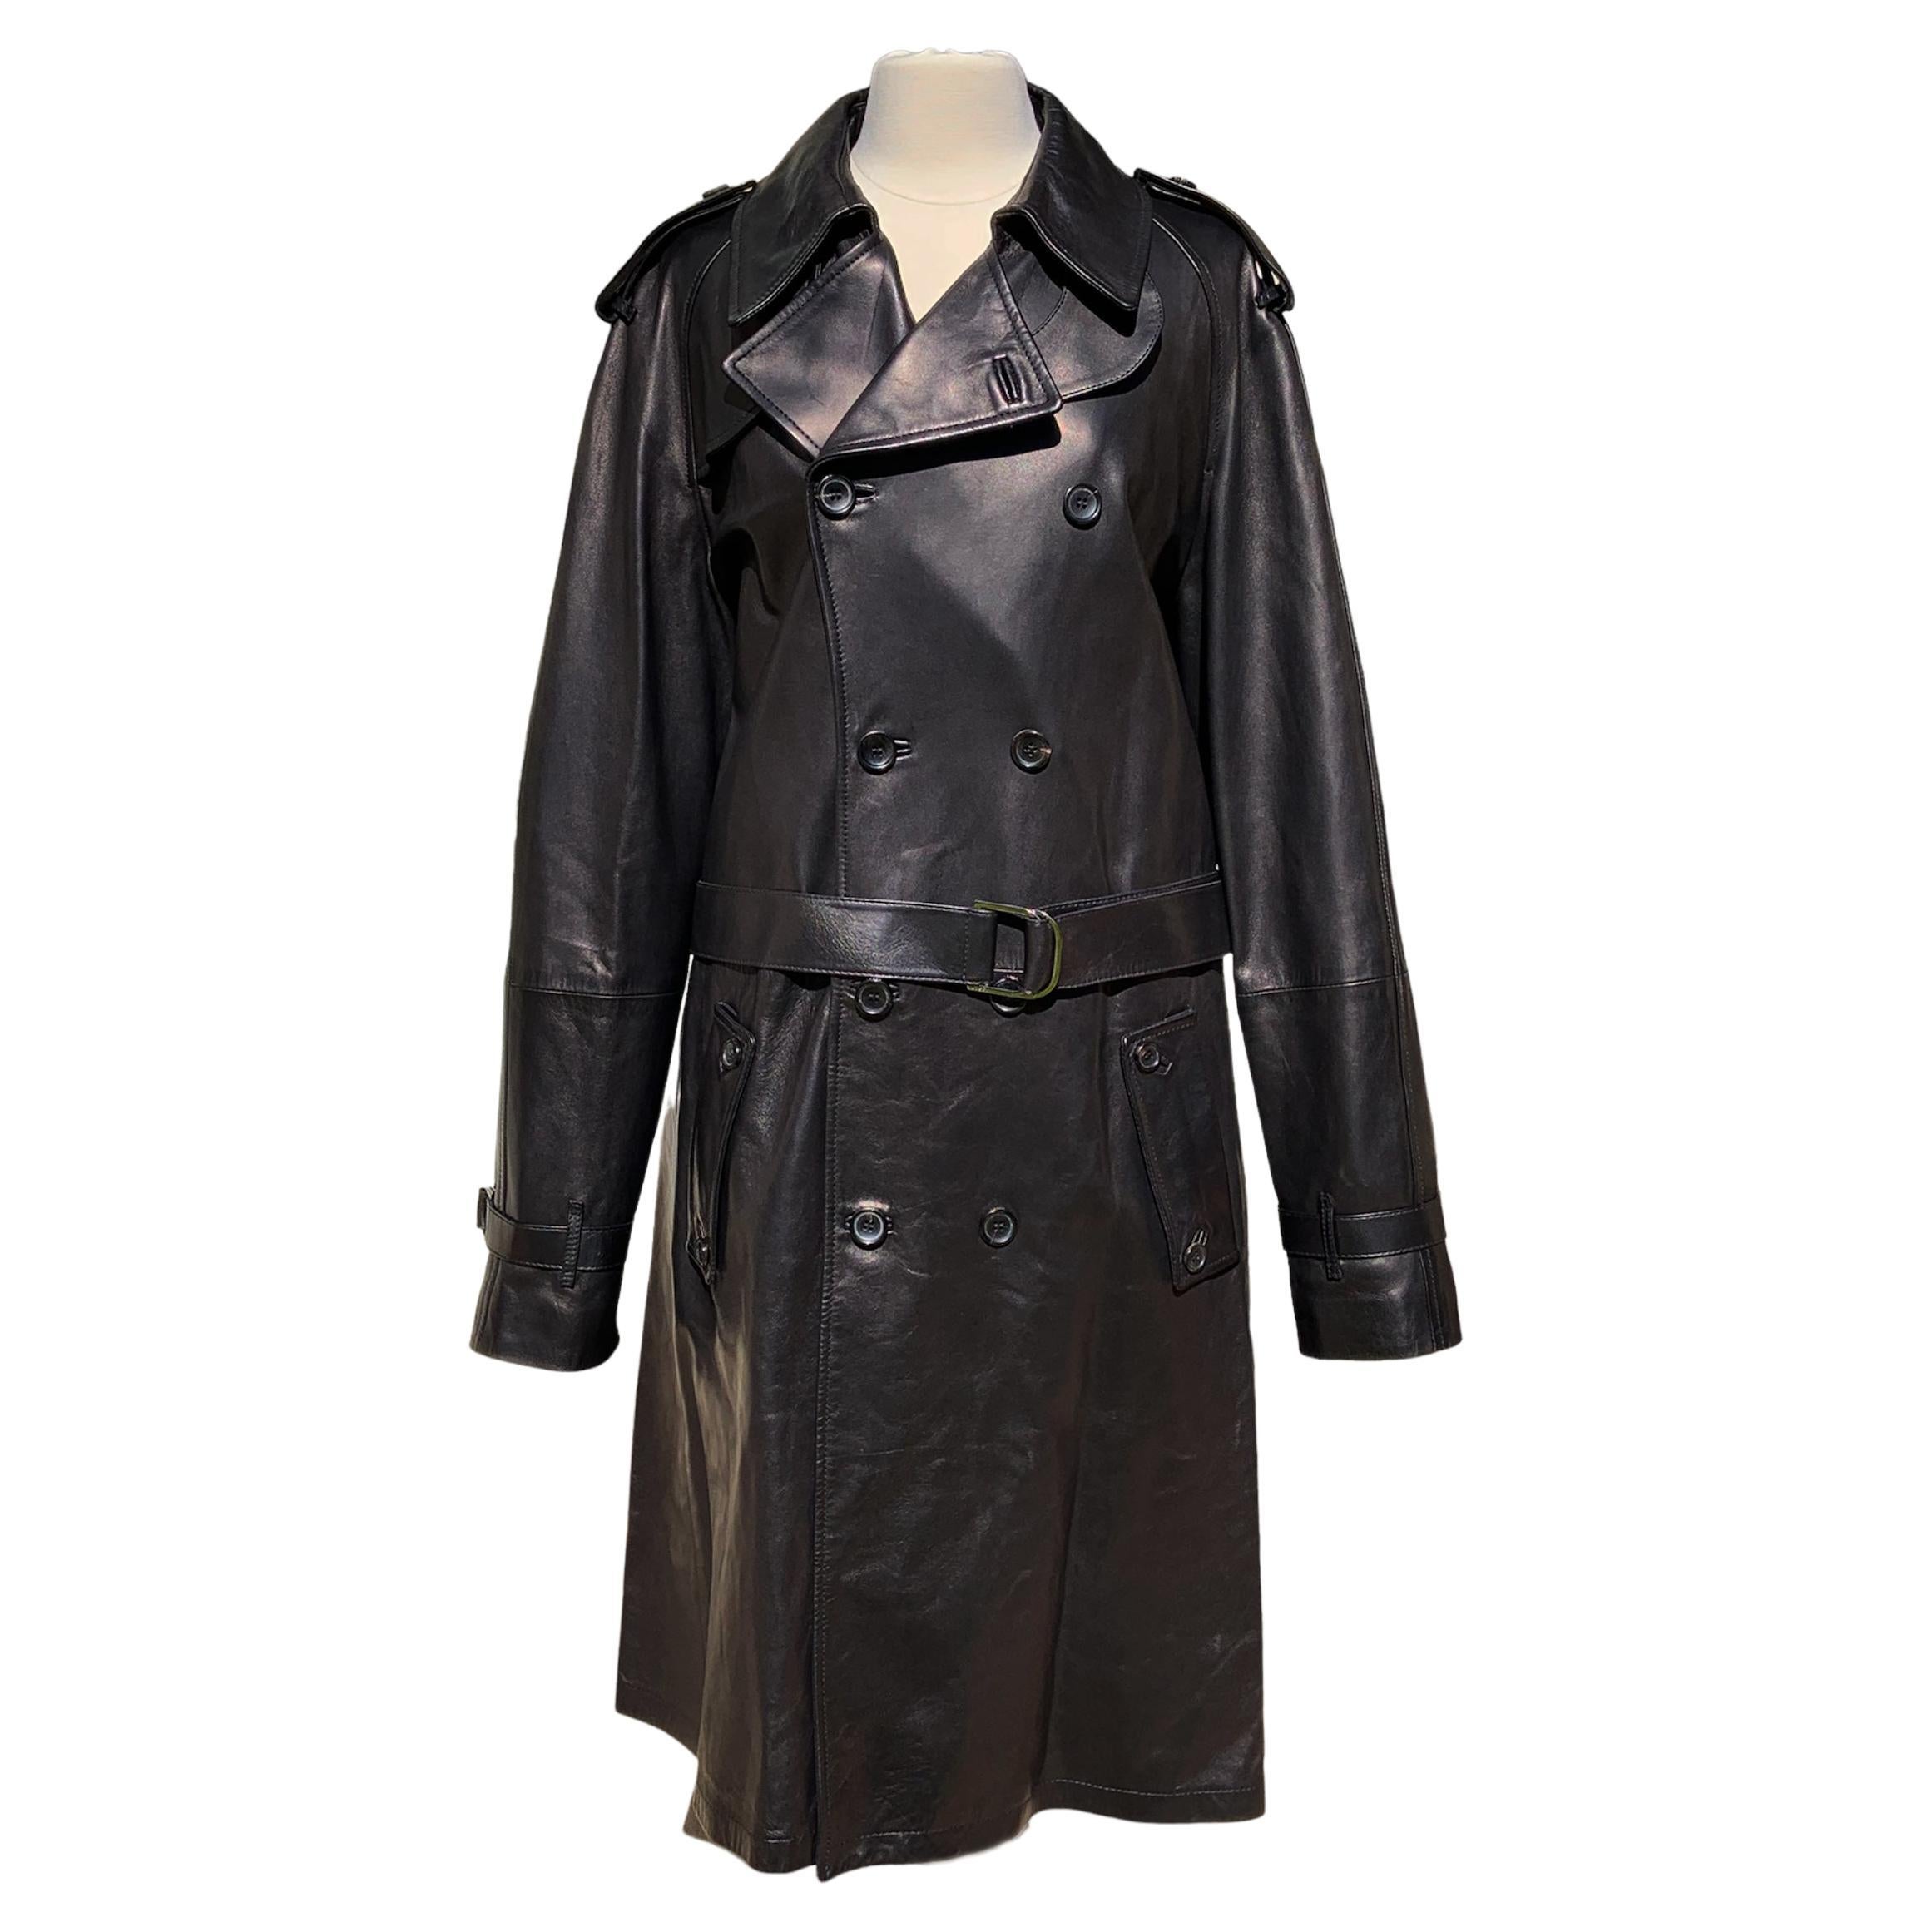 Gucci, Jackets & Coats, Gucci Embellished Trench Coat It 38